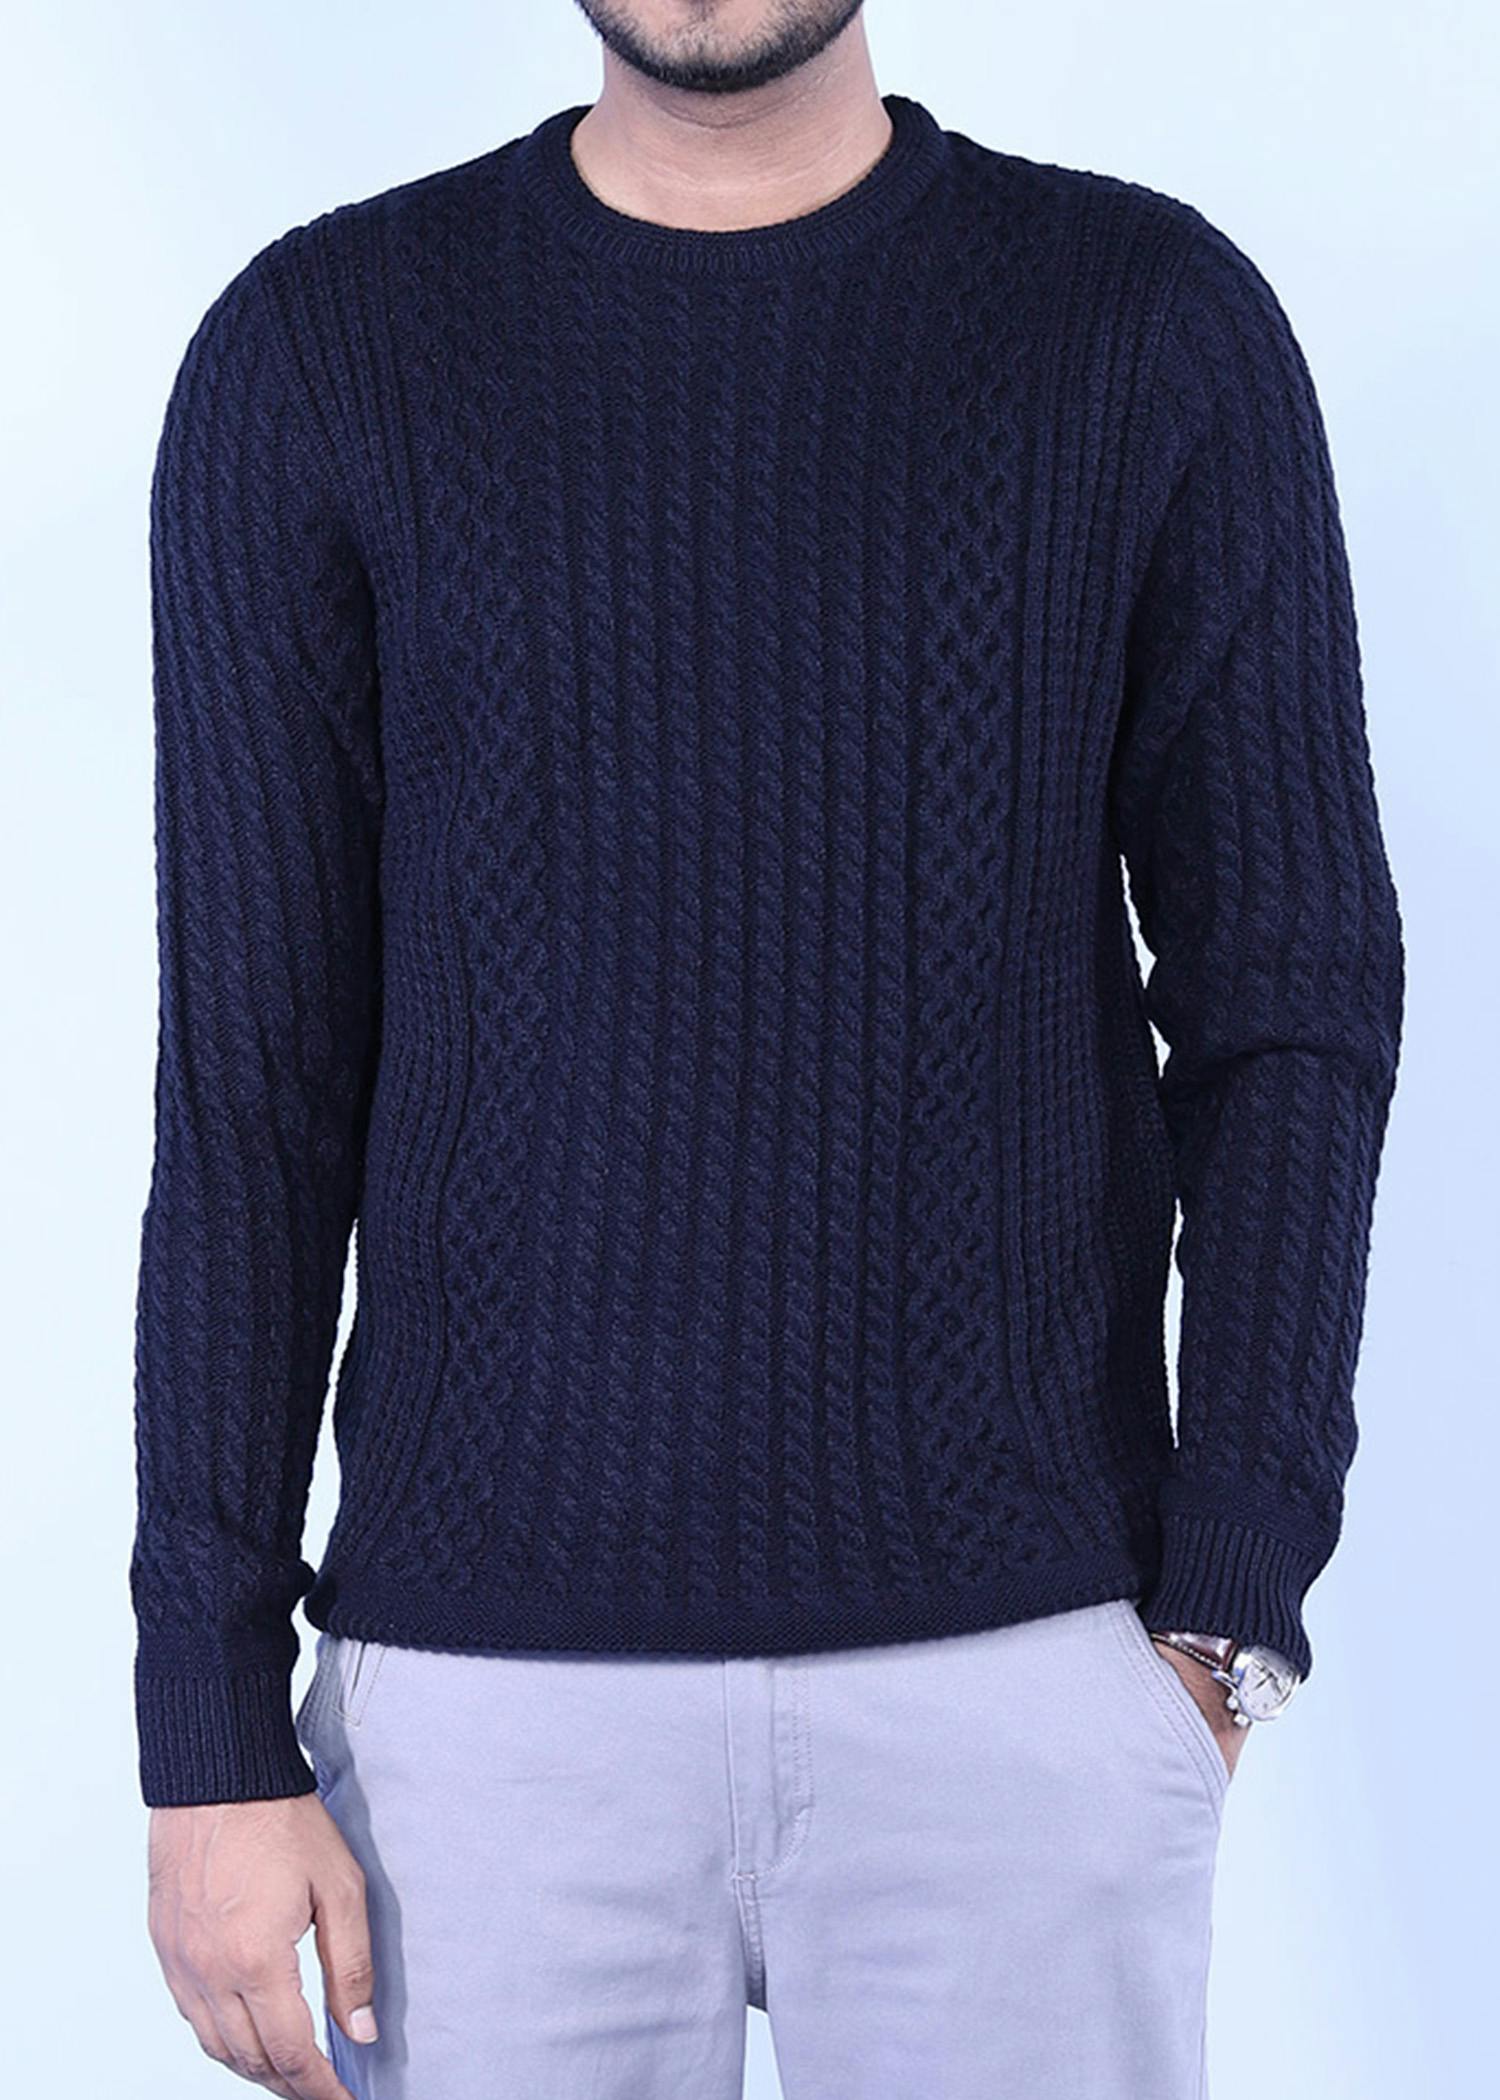 hillstar viii sweater navy color headcropped